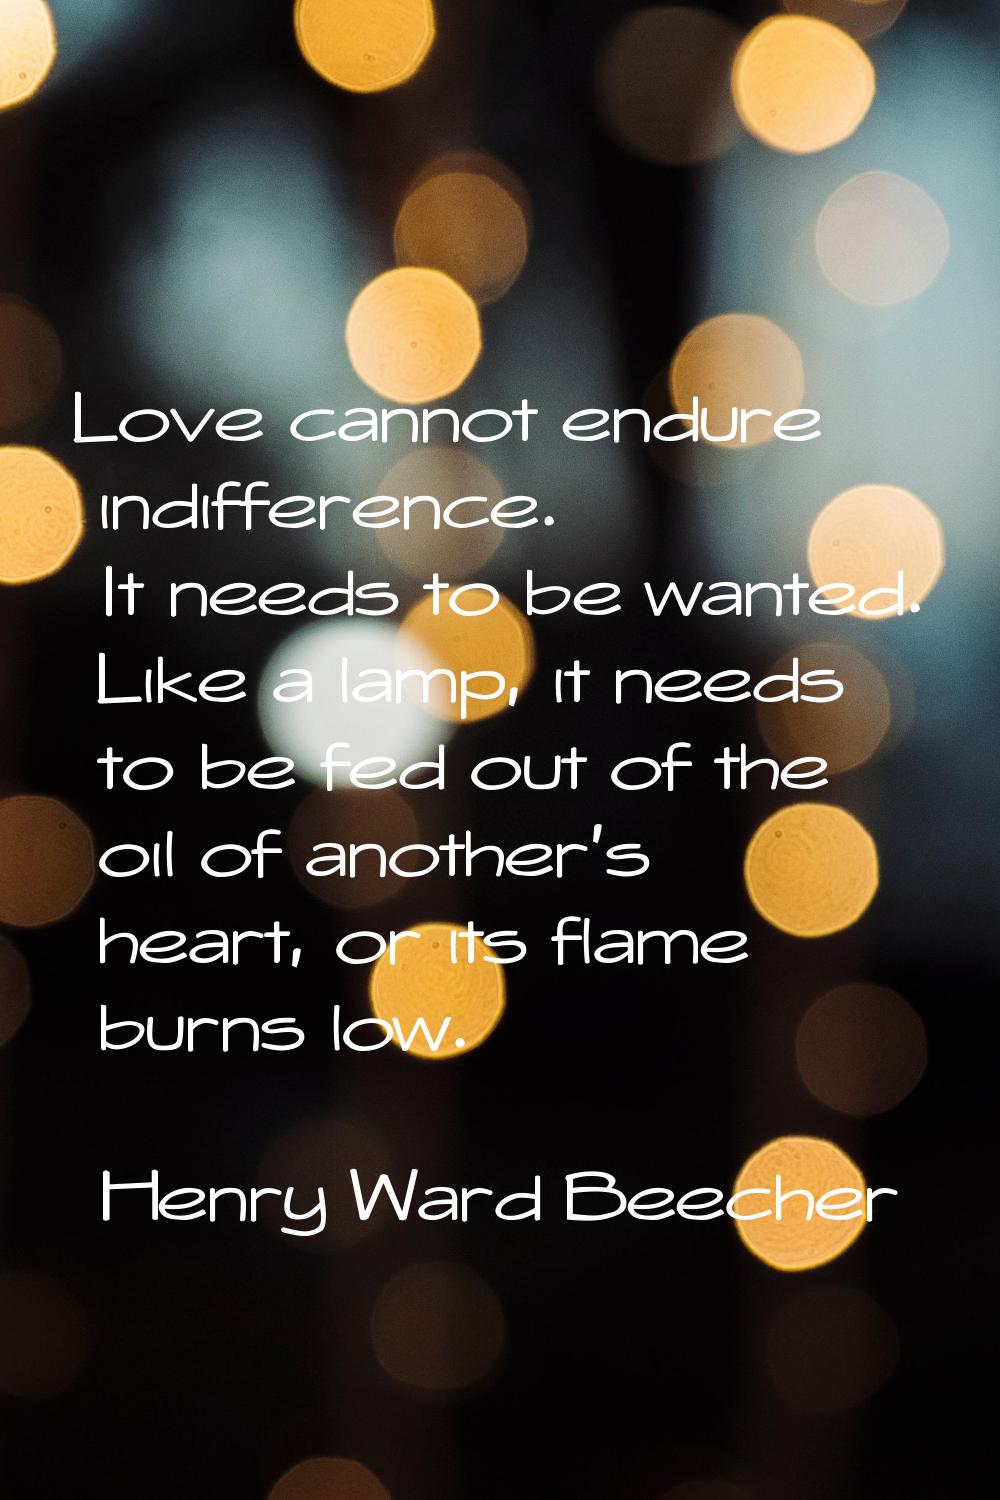 Love cannot endure indifference. It needs to be wanted. Like a lamp, it needs to be fed out of the 